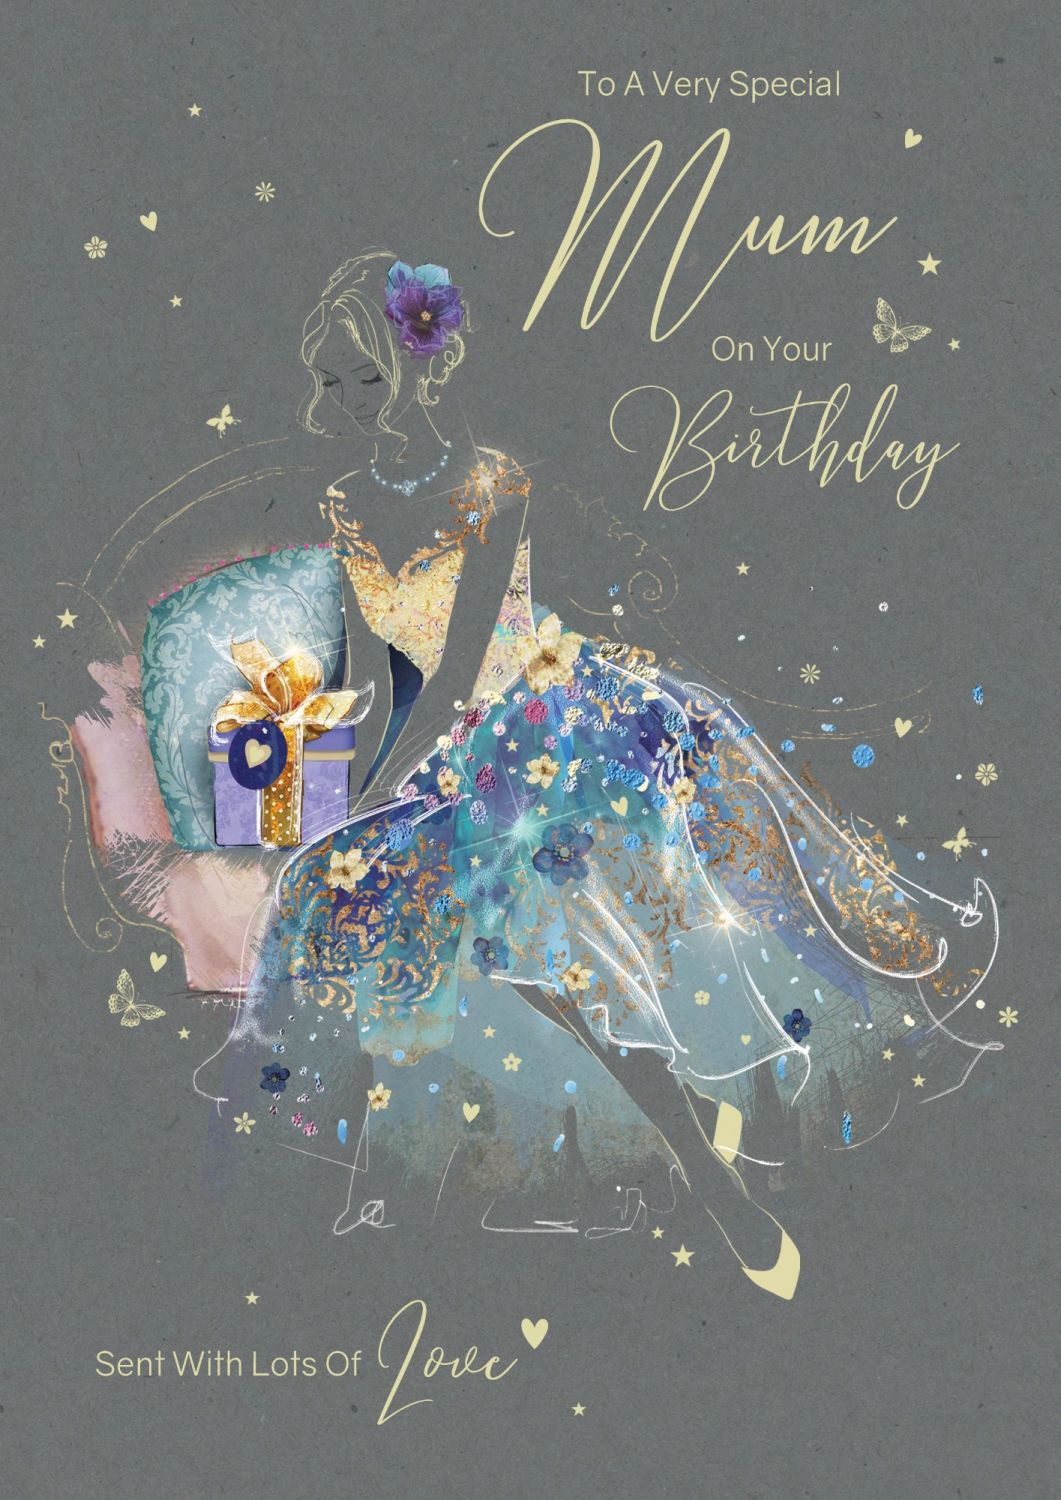 To A Very Special Mum On Your Birthday - UNIQUE Birthday CARDS - Pretty BIR